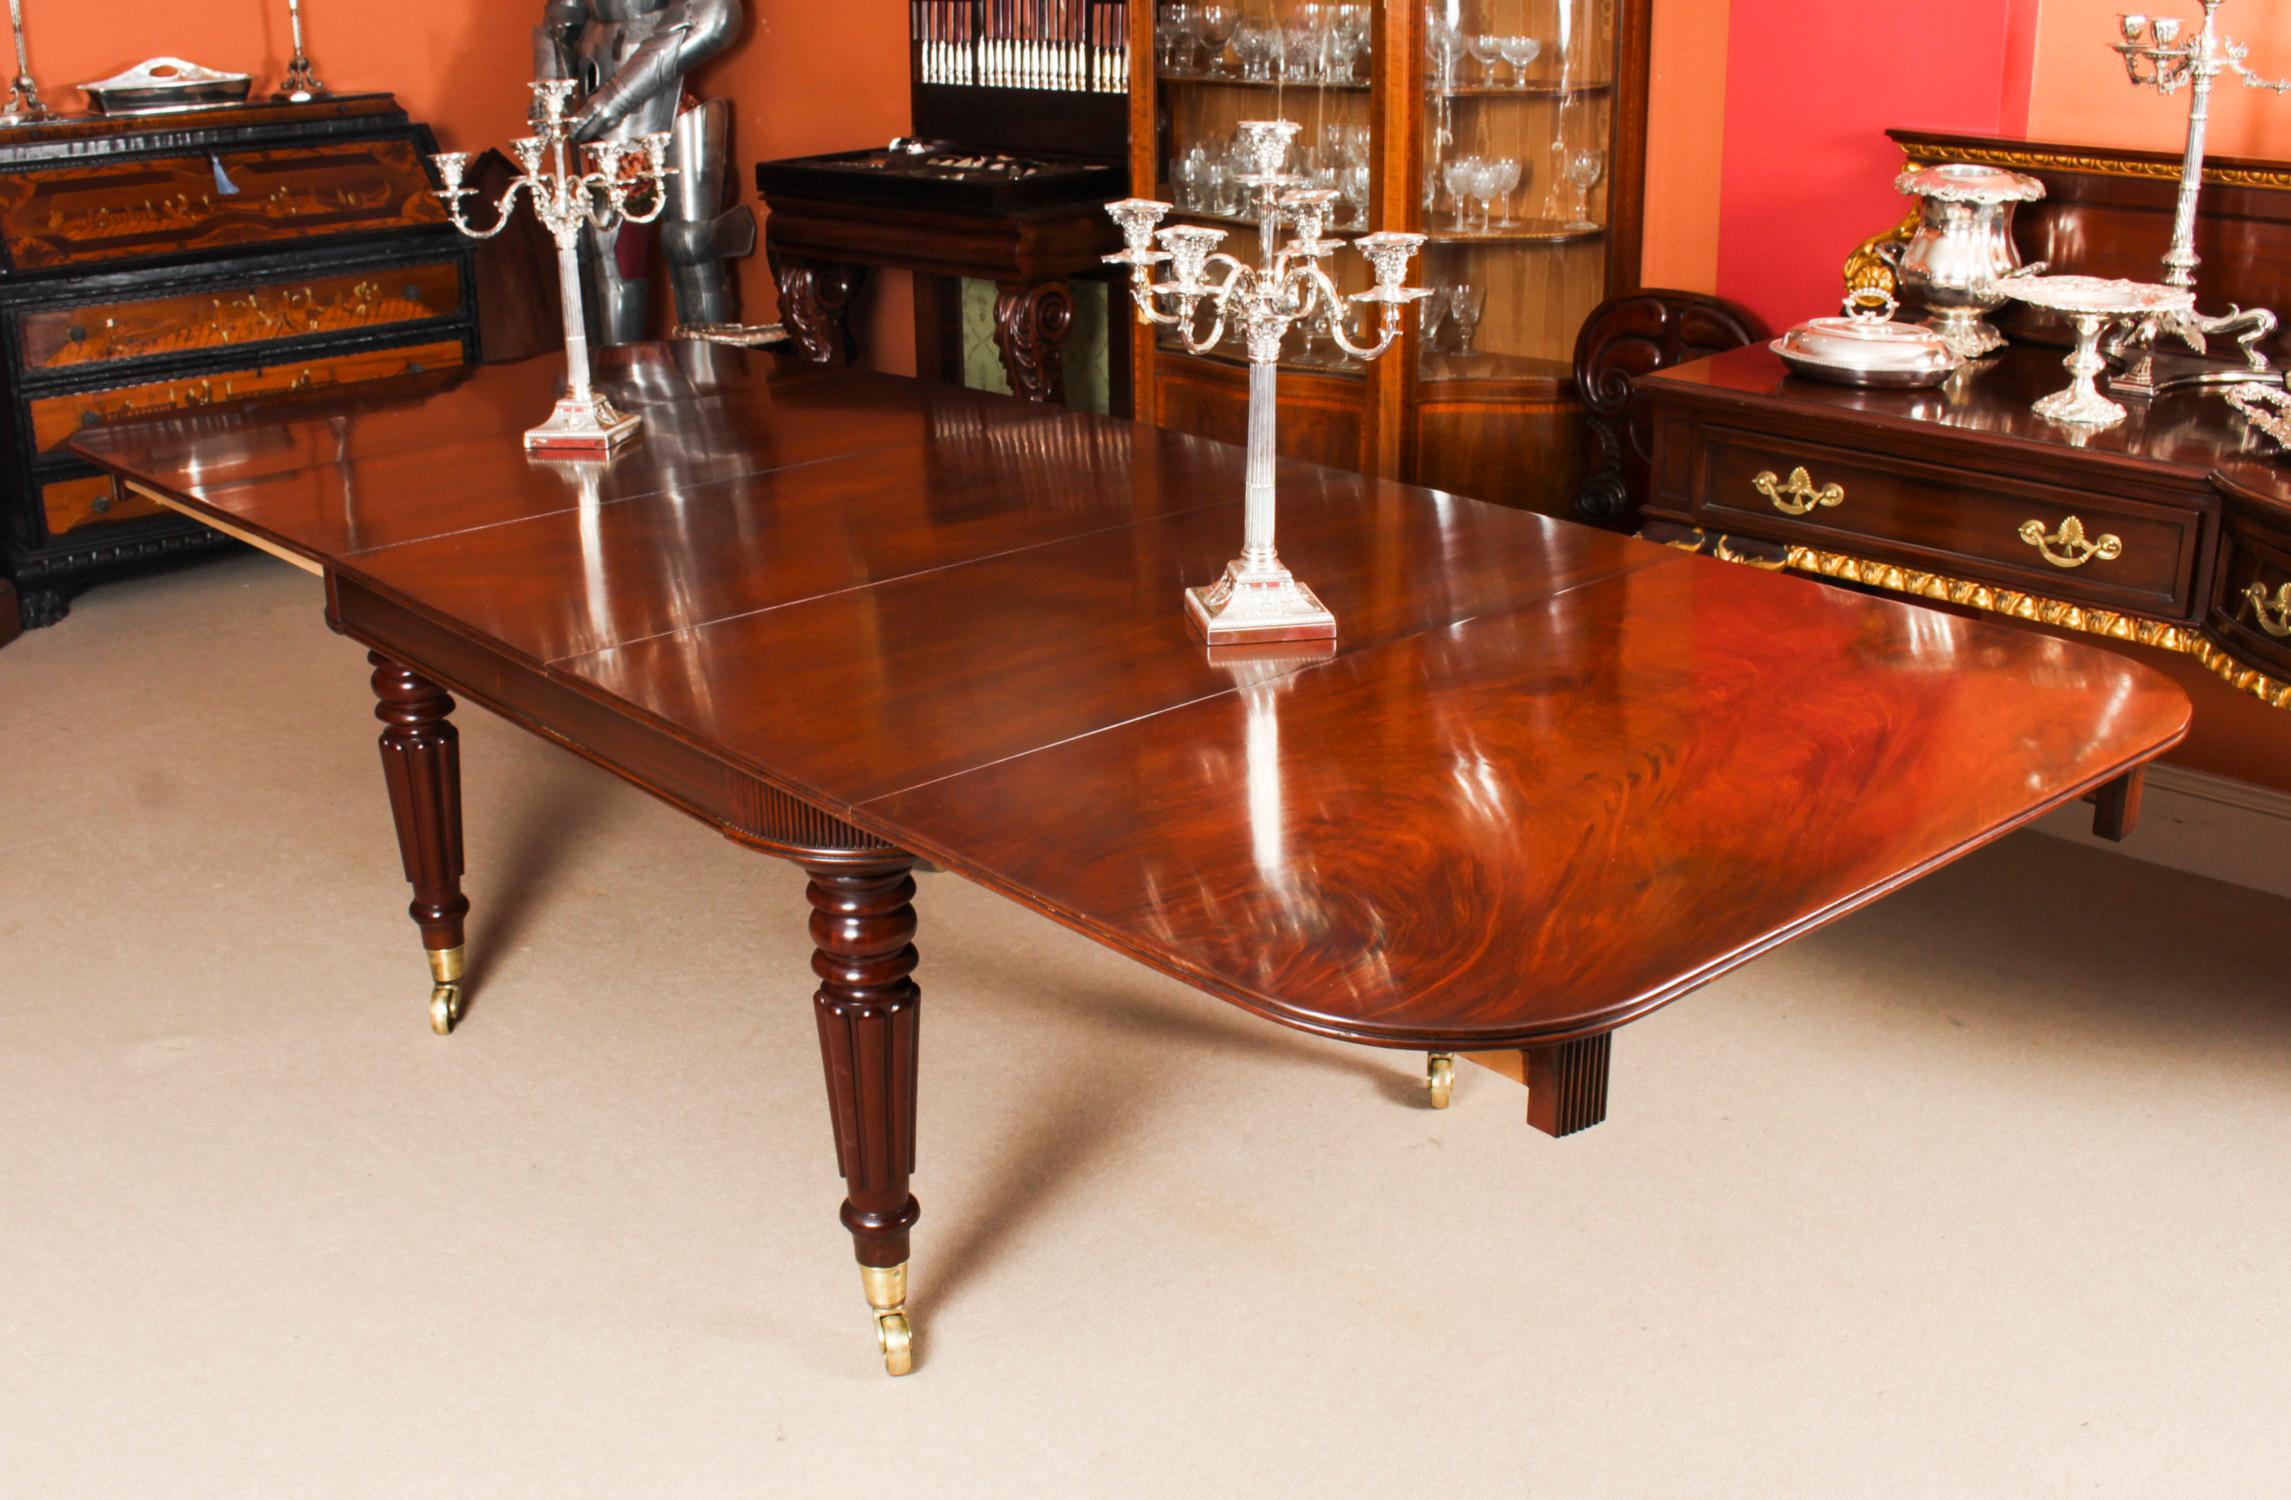 A very rare opportunity to own an antique English Regency dining room table, Circa 1820 in date, which can seat ten people in comfort.
 
The table is made of beautiful solid flame mahogany, which can be seen in the photos of the top with it's